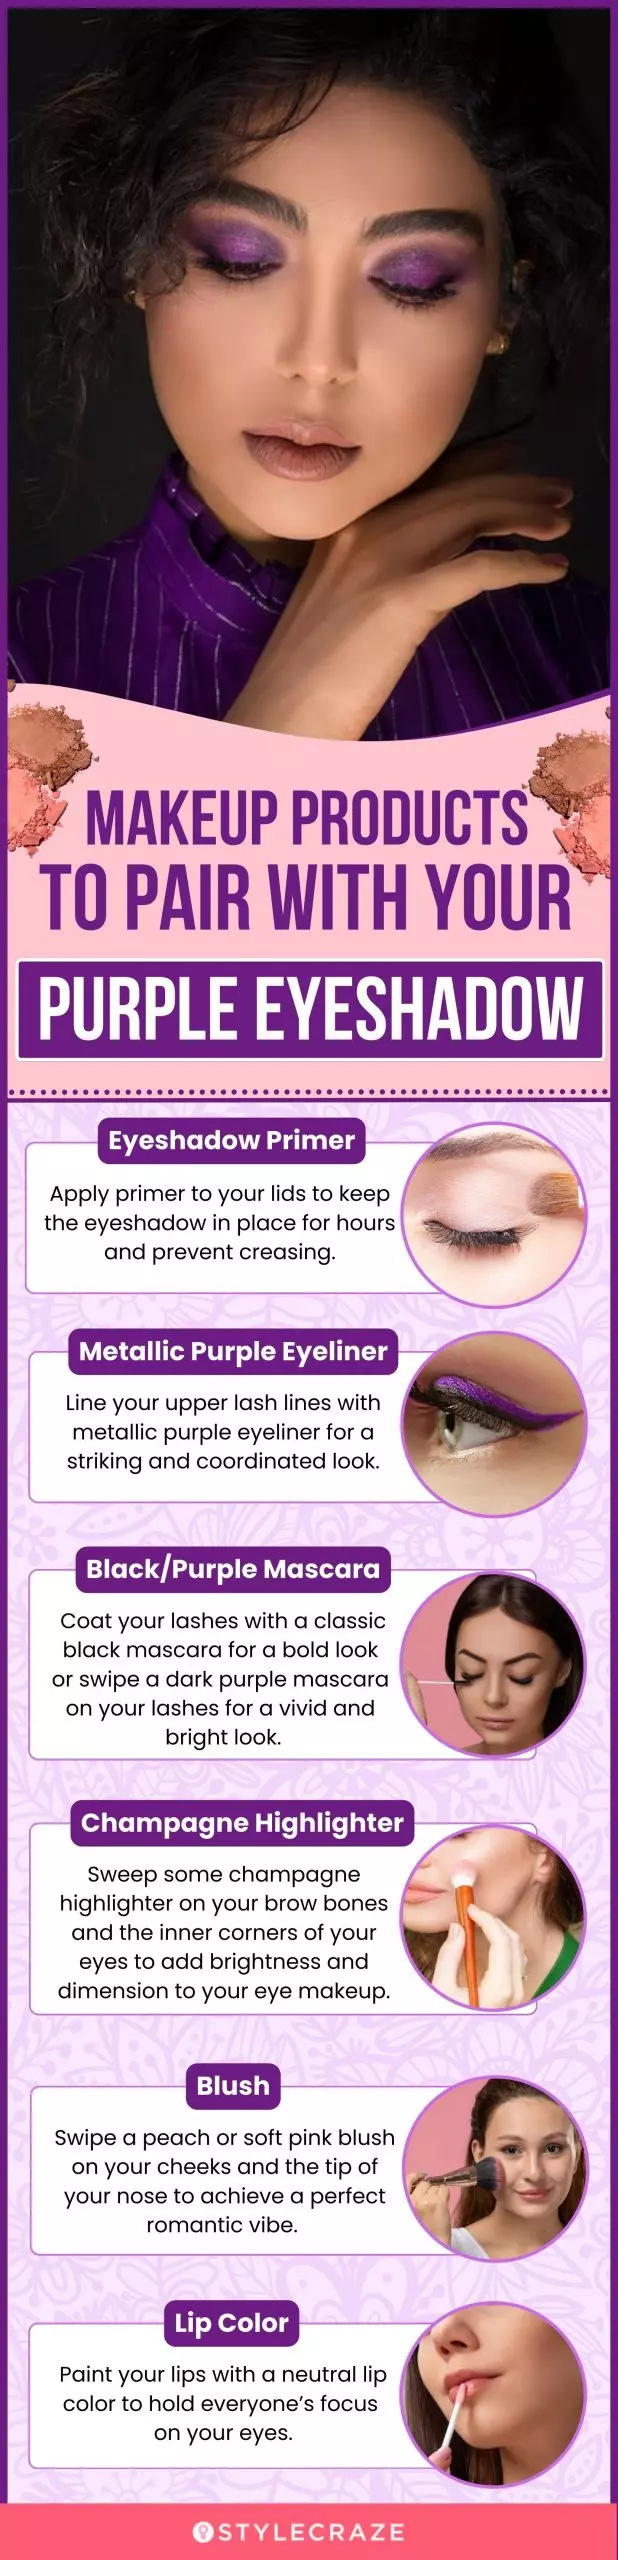 Makeup Products To Pair With Your Purple Eyeshadow (infographic)